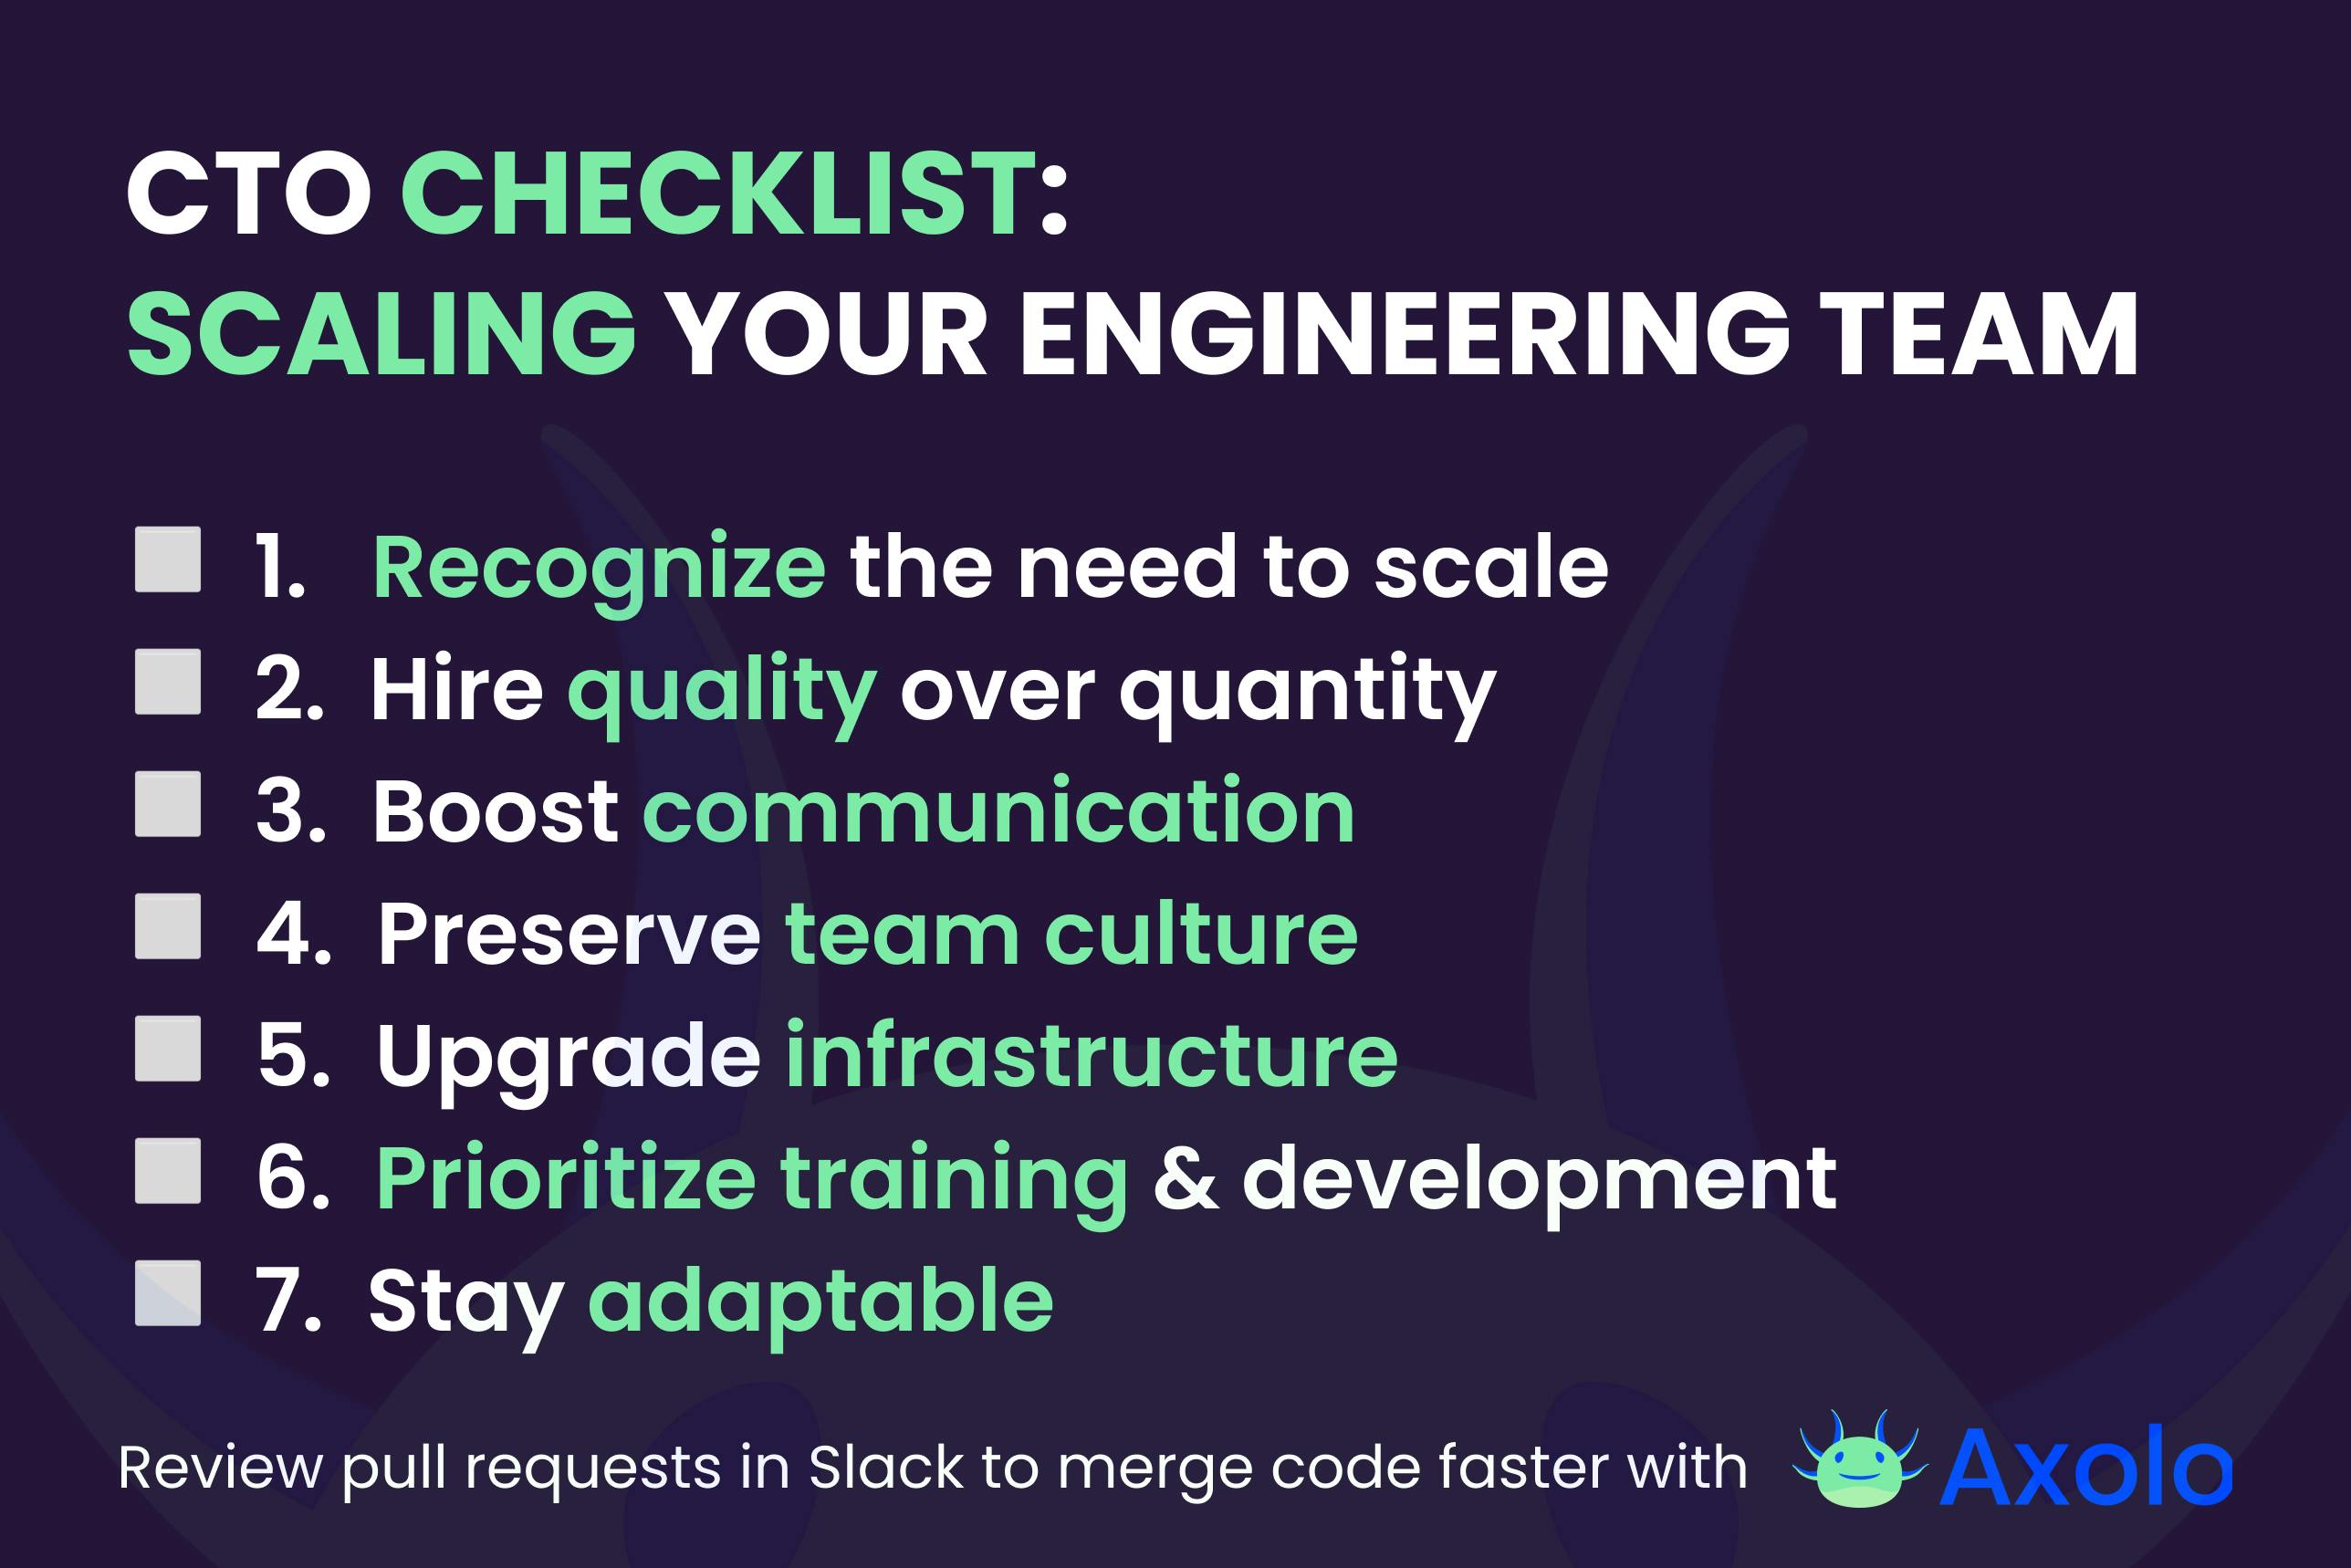 CTO checklist to scale your engineering team